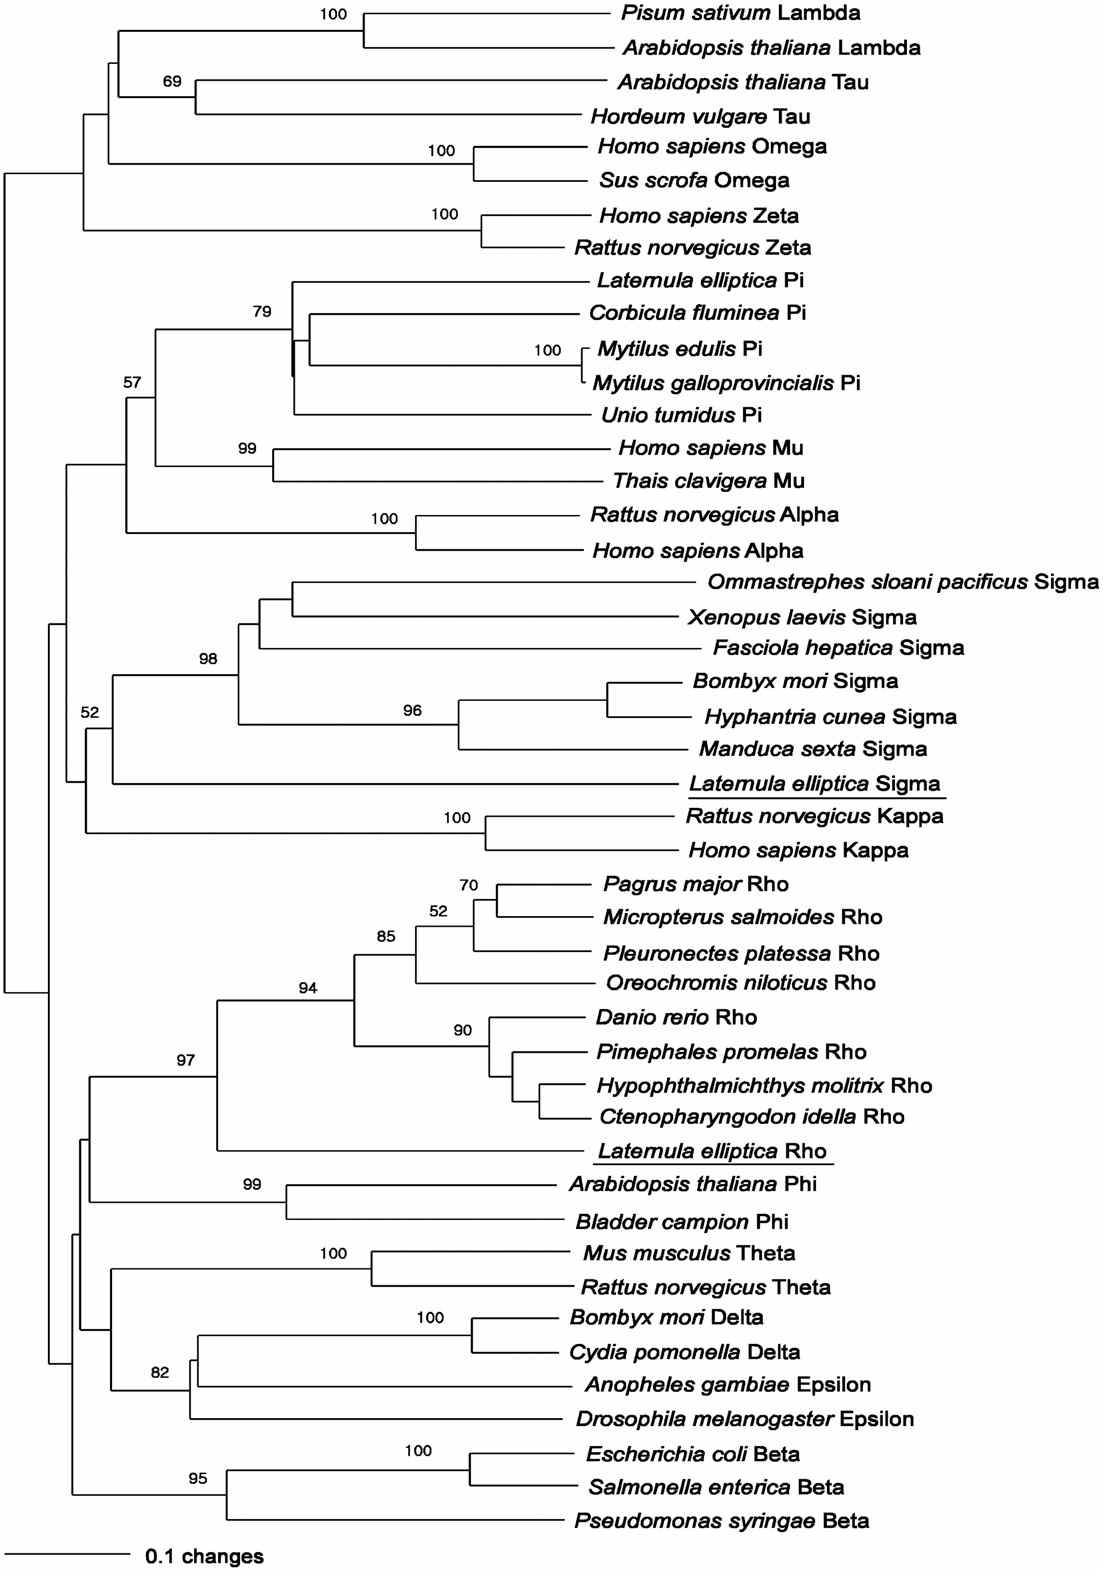 Phylogenetic analysis of the two glutathione S-transferase proteinscompared to other species.